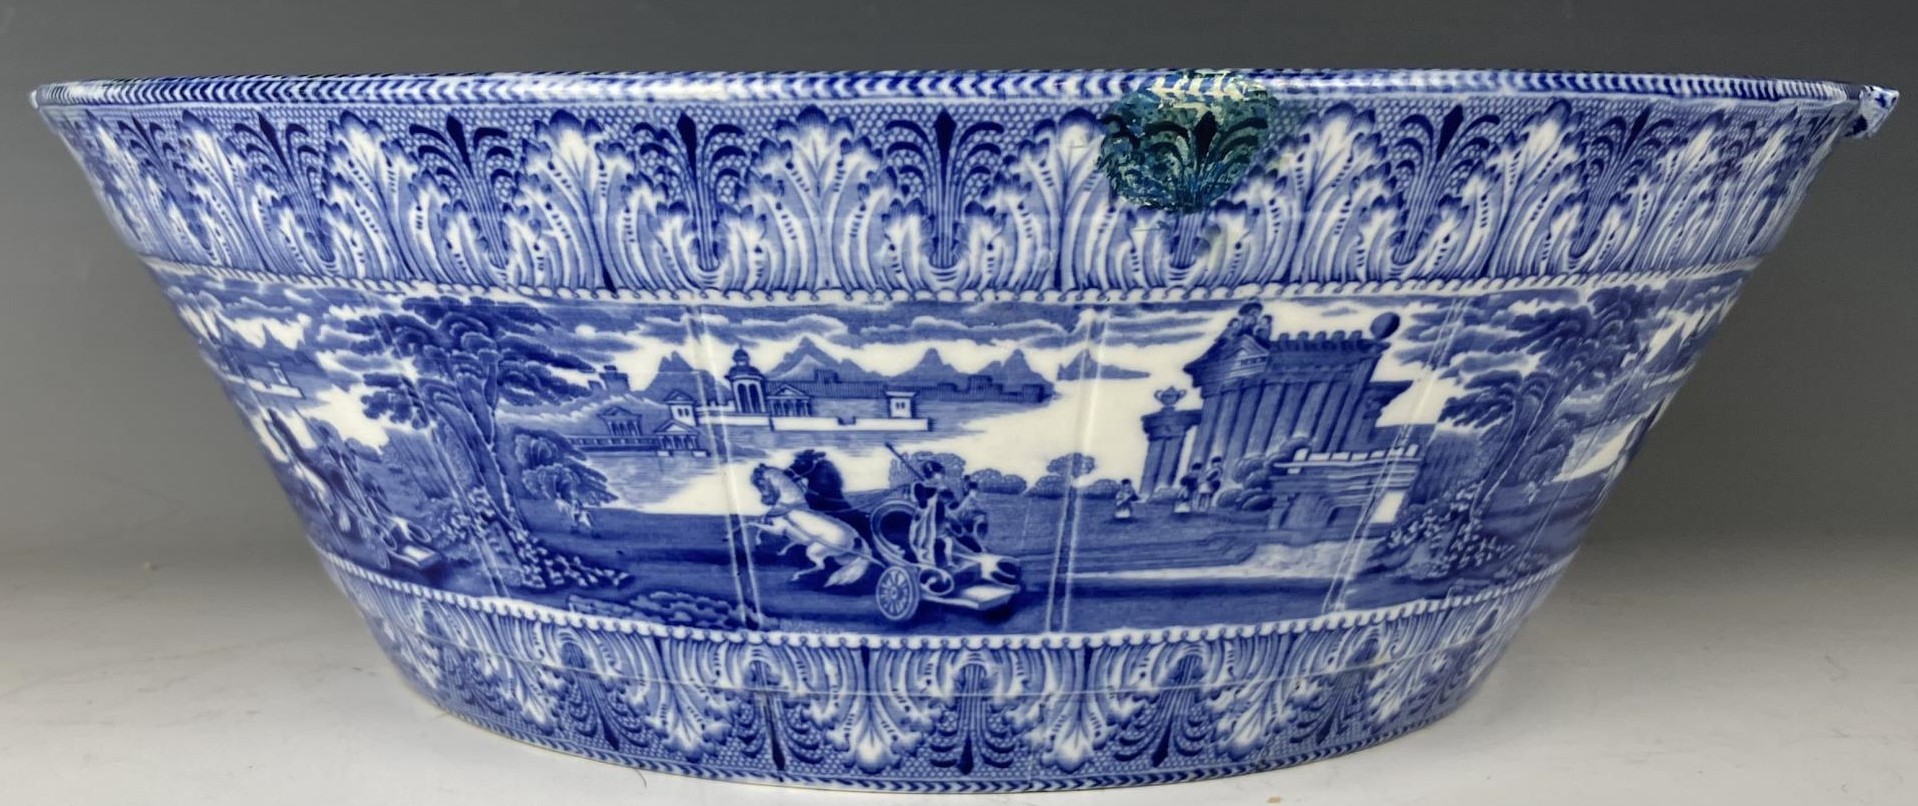 A late 19th century Cauldon blue and white basin or cream pan, decorated classical scenes, 40 cm - Image 3 of 4